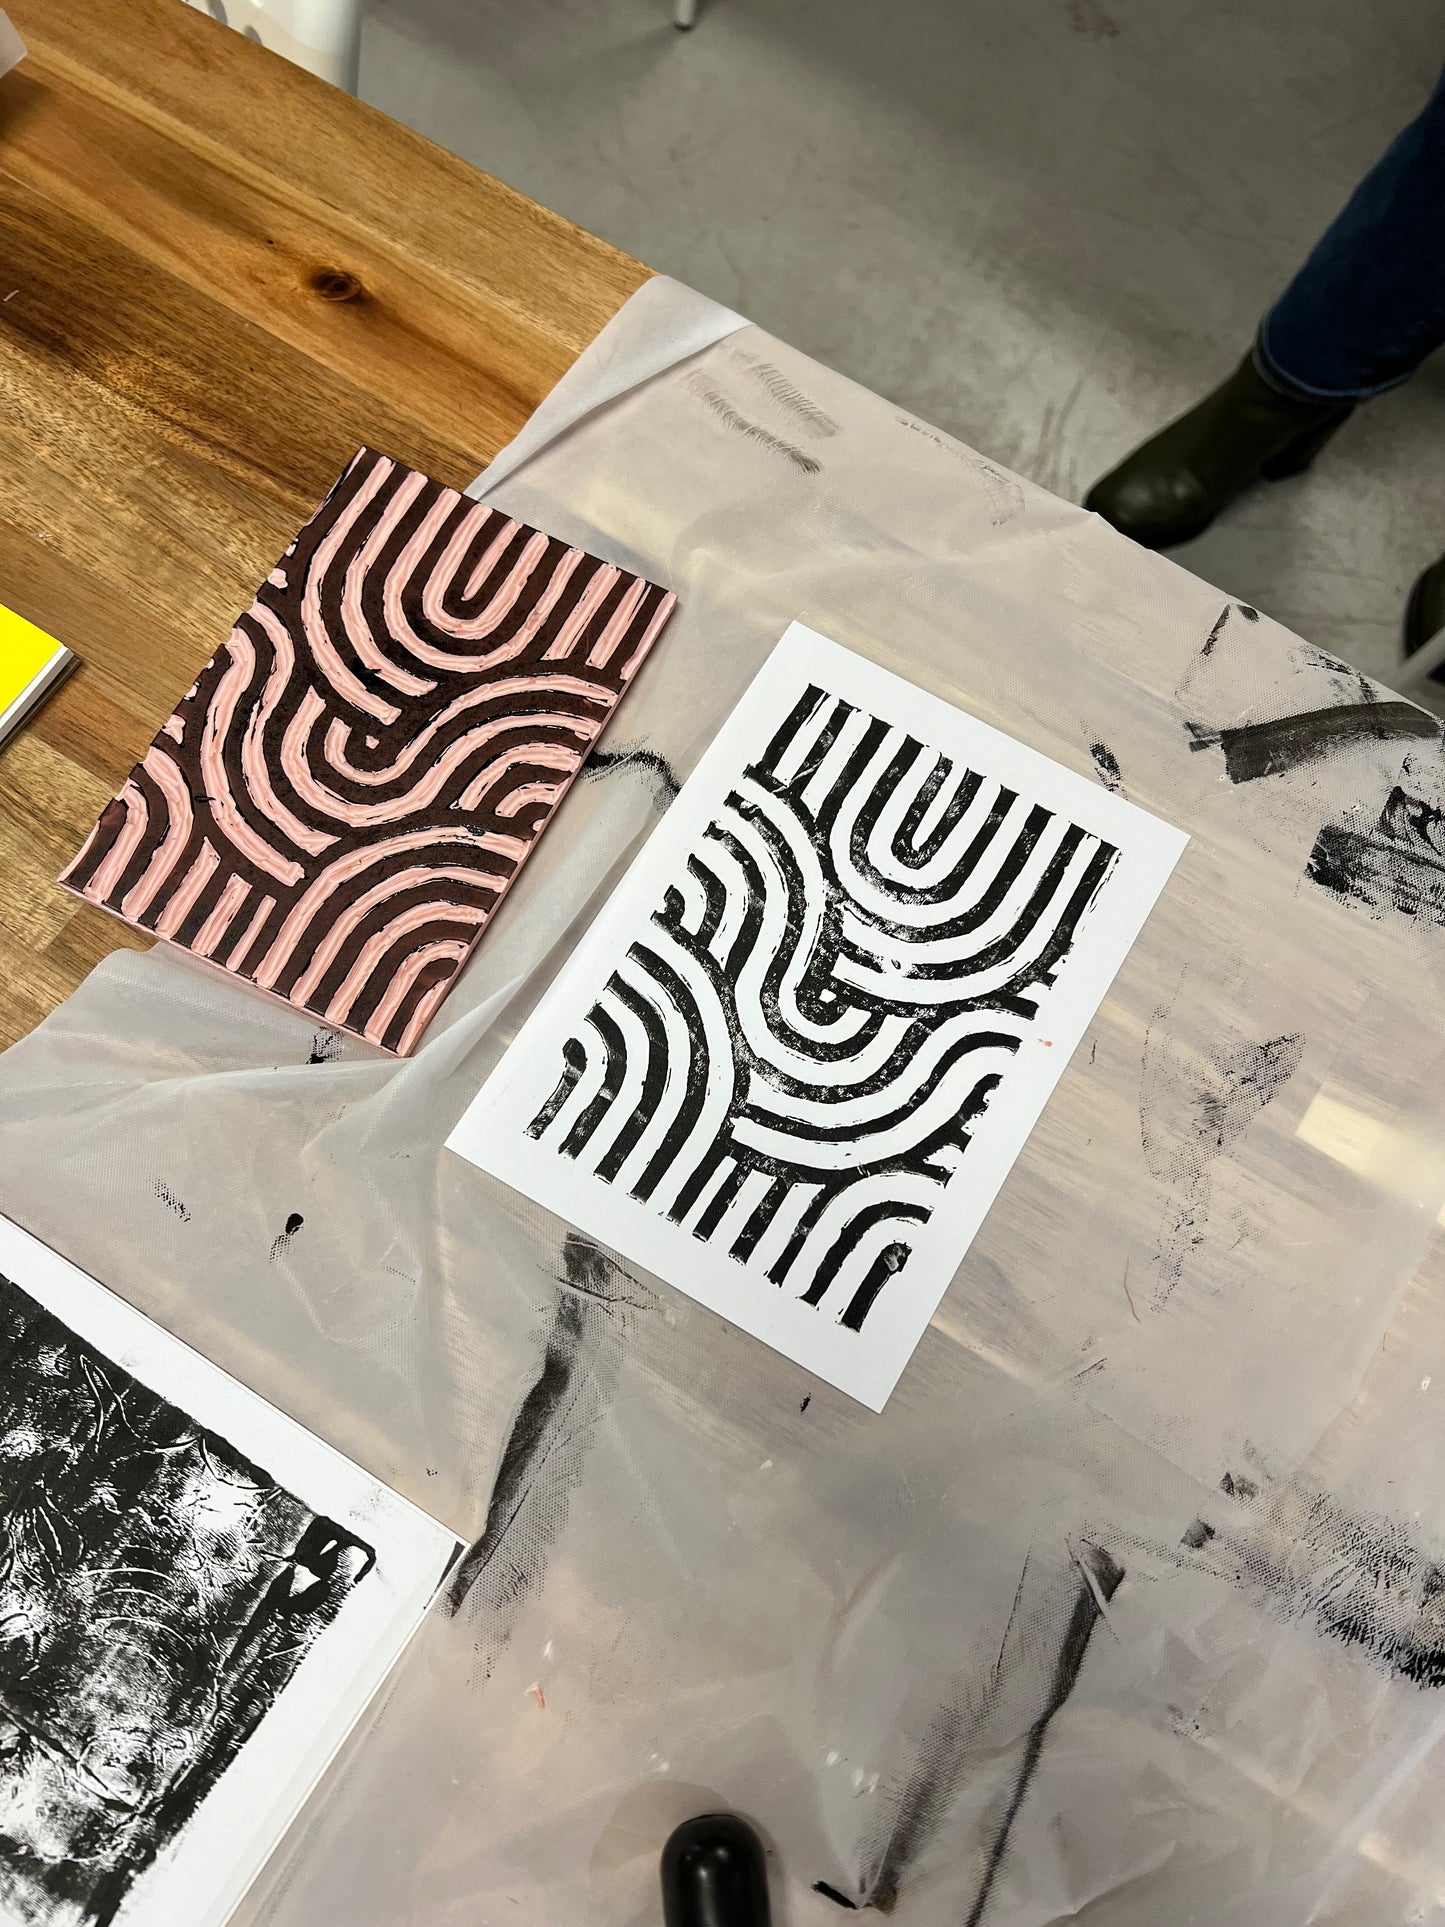 Block Printing Canvas Bags and Frameable Paper Class | Sun. March 17th 11am-1:30pm